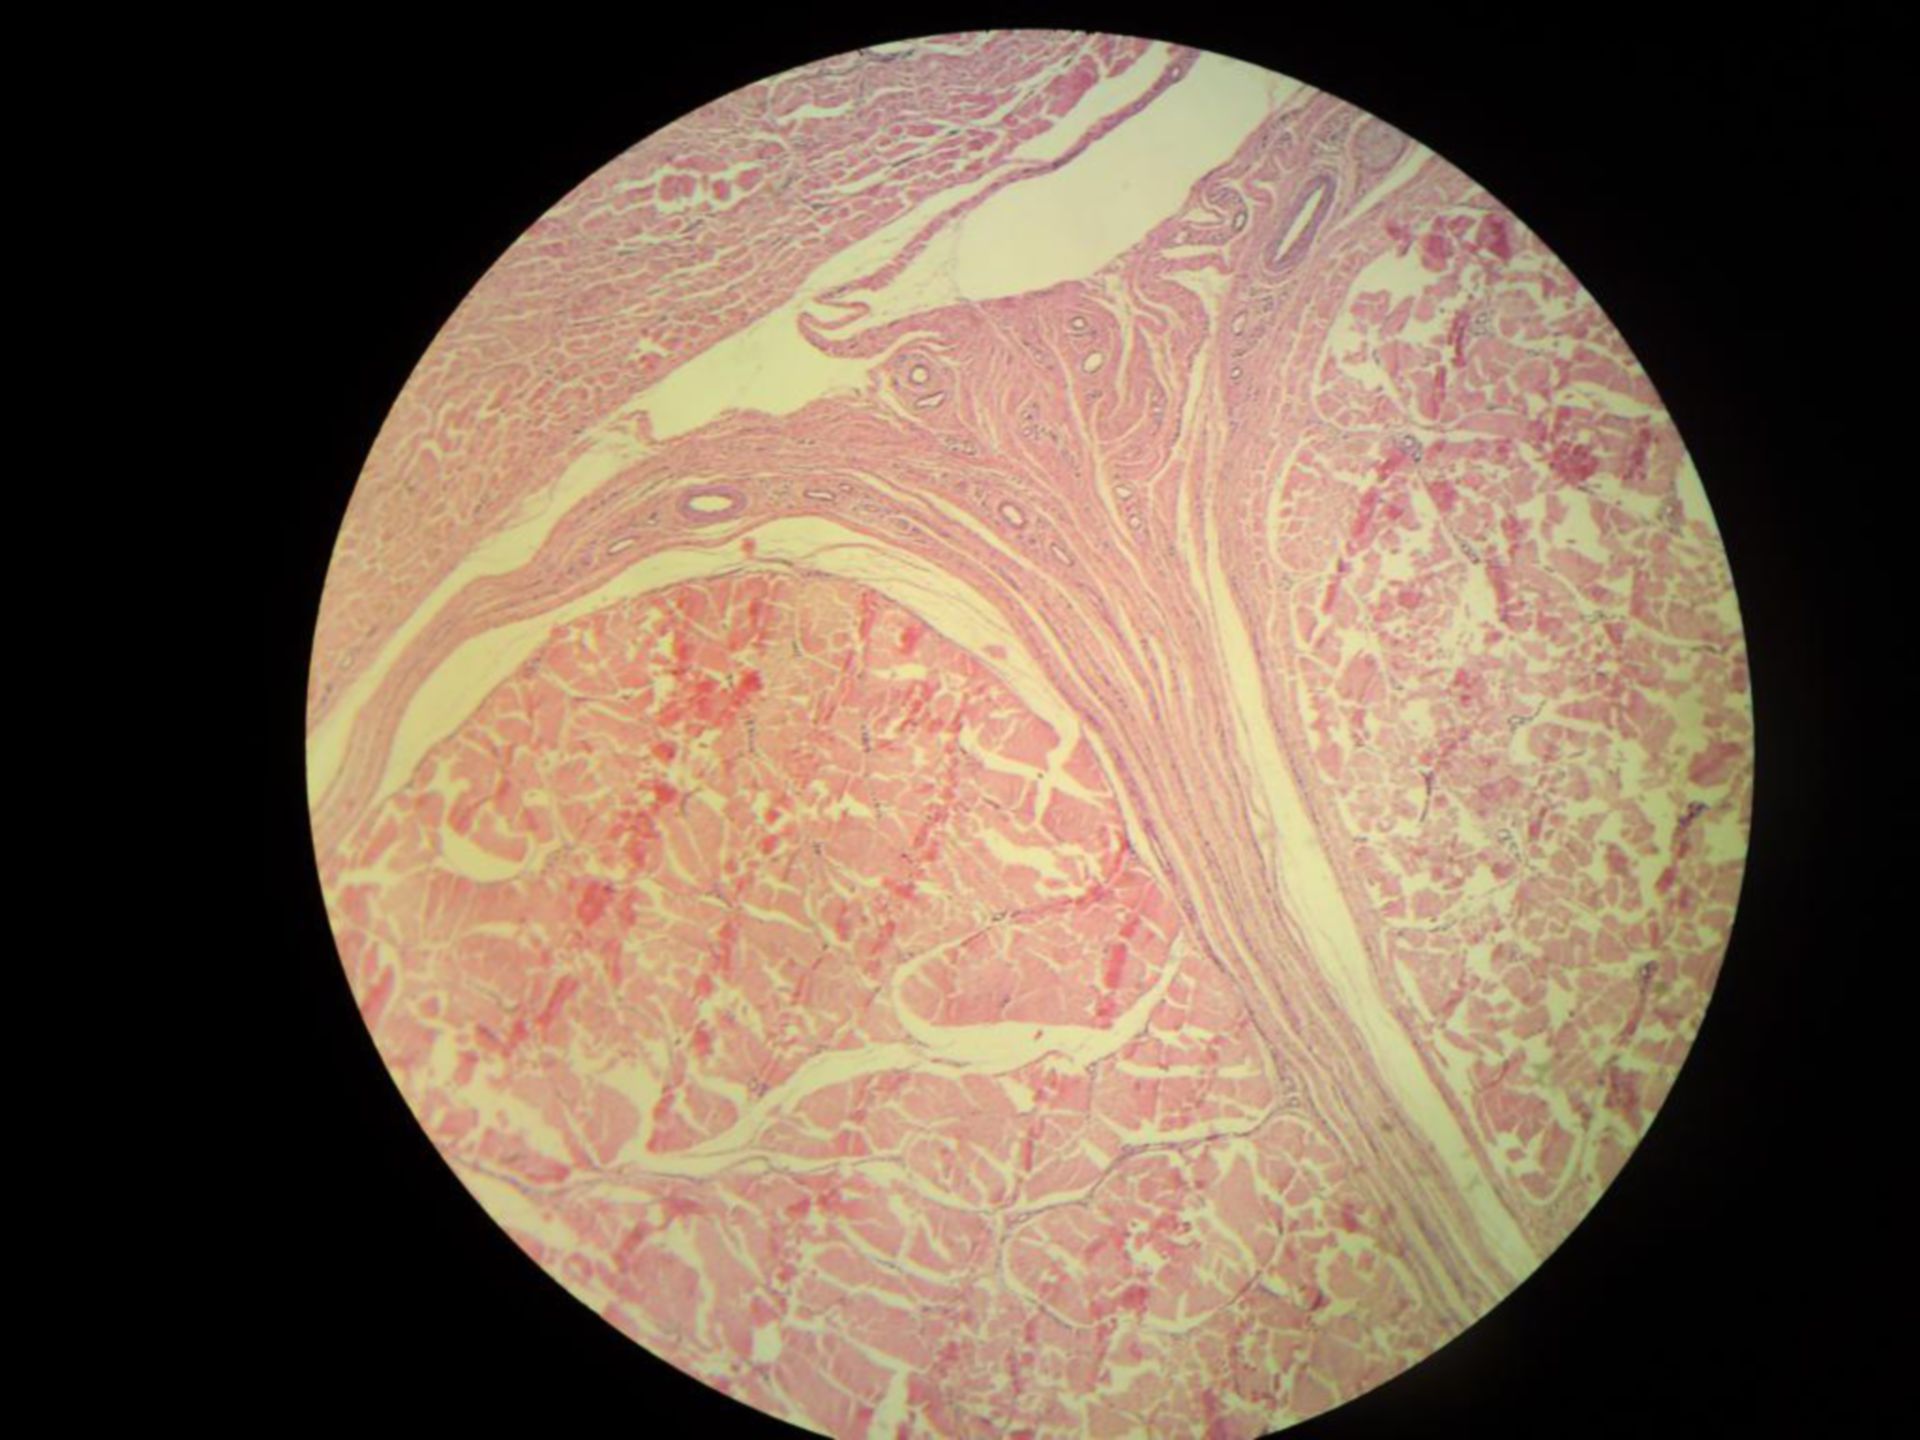 Taut connective tissue - tendon transverse section, dog